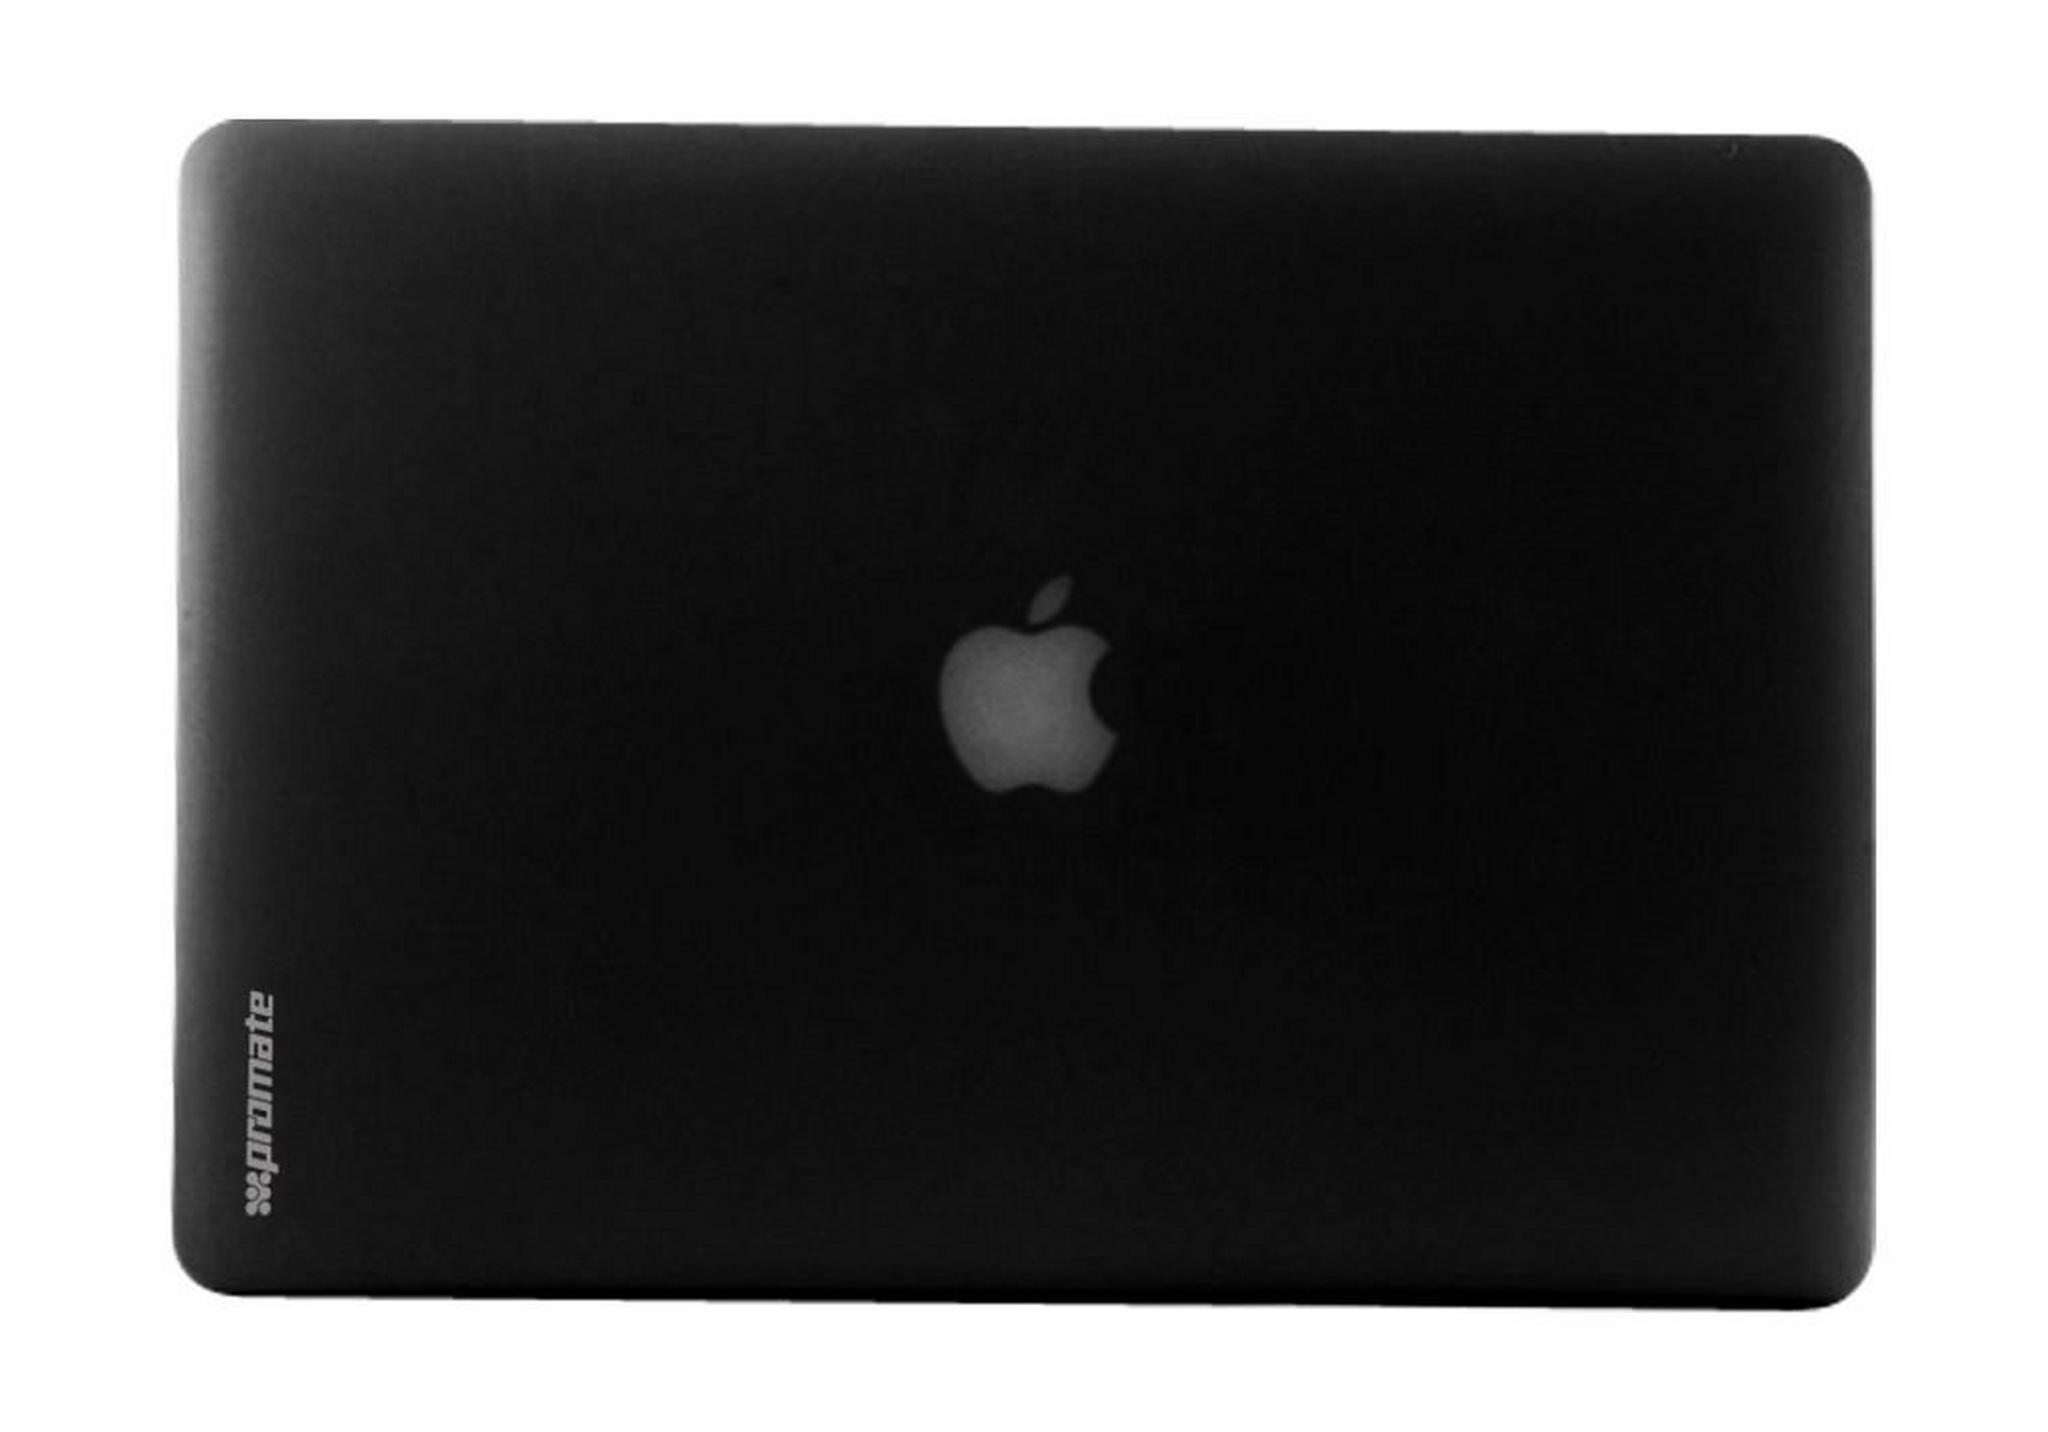 Promate MacShell Protective Case for Macbook Air 11.6-inch - Black